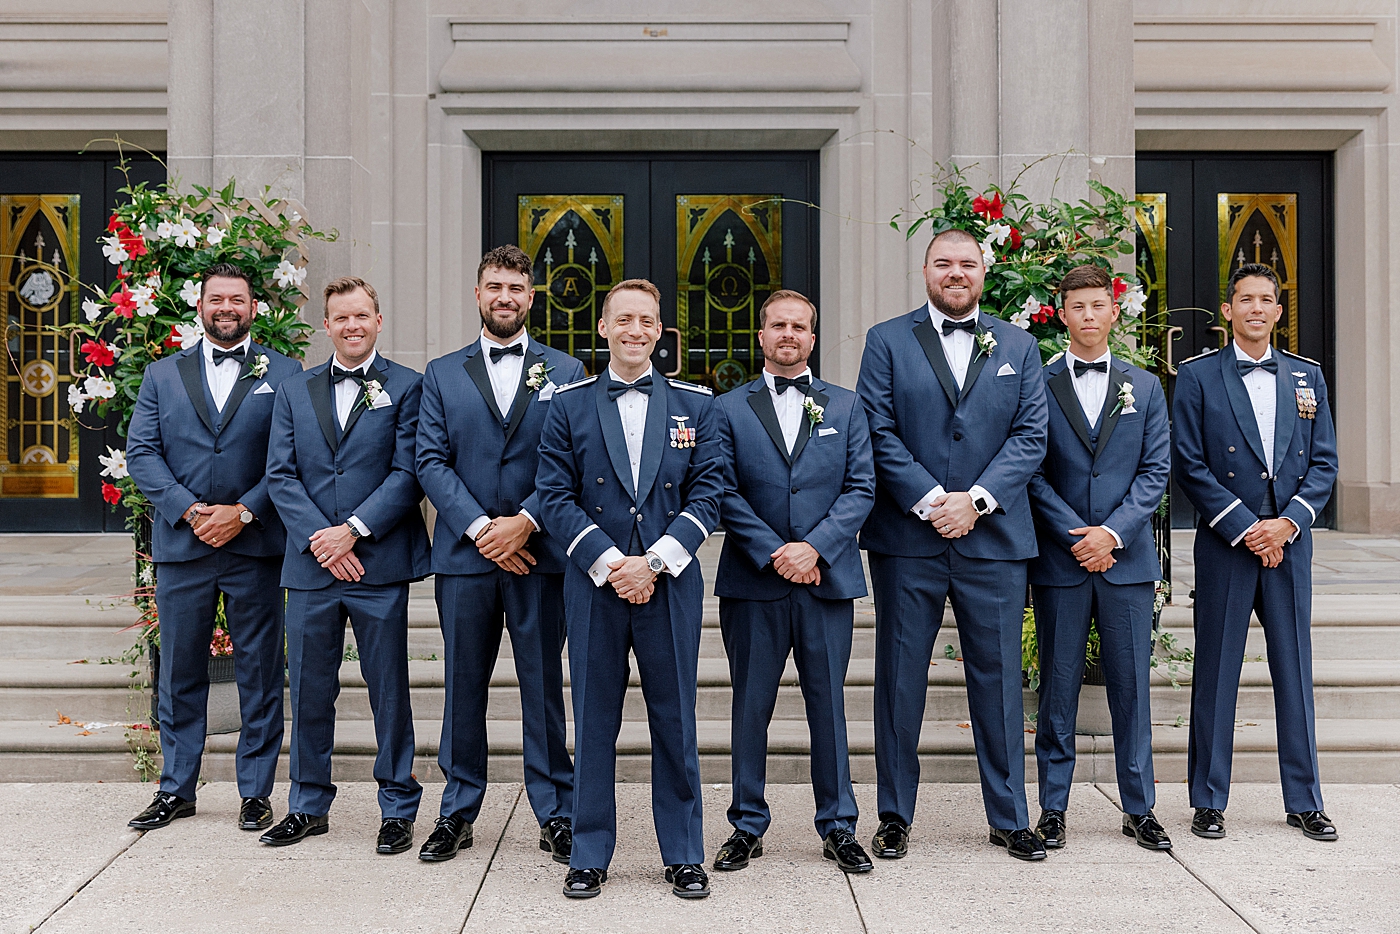 Groomsmen in front of wedding venue | Image by Hope Helmuth Photography